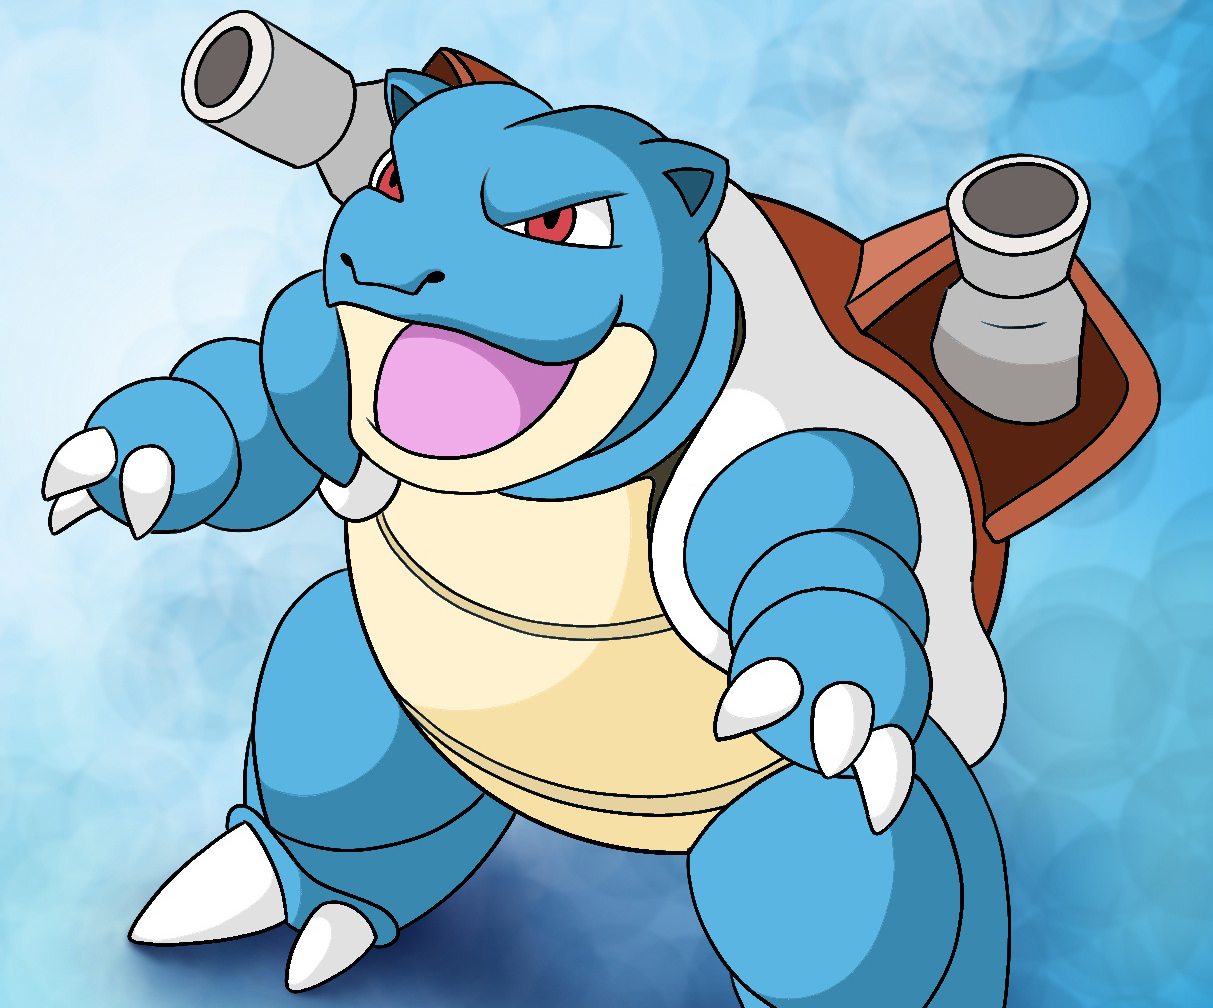 Hey everyone, today I'll be showing you how to draw Blastoise, Pok...